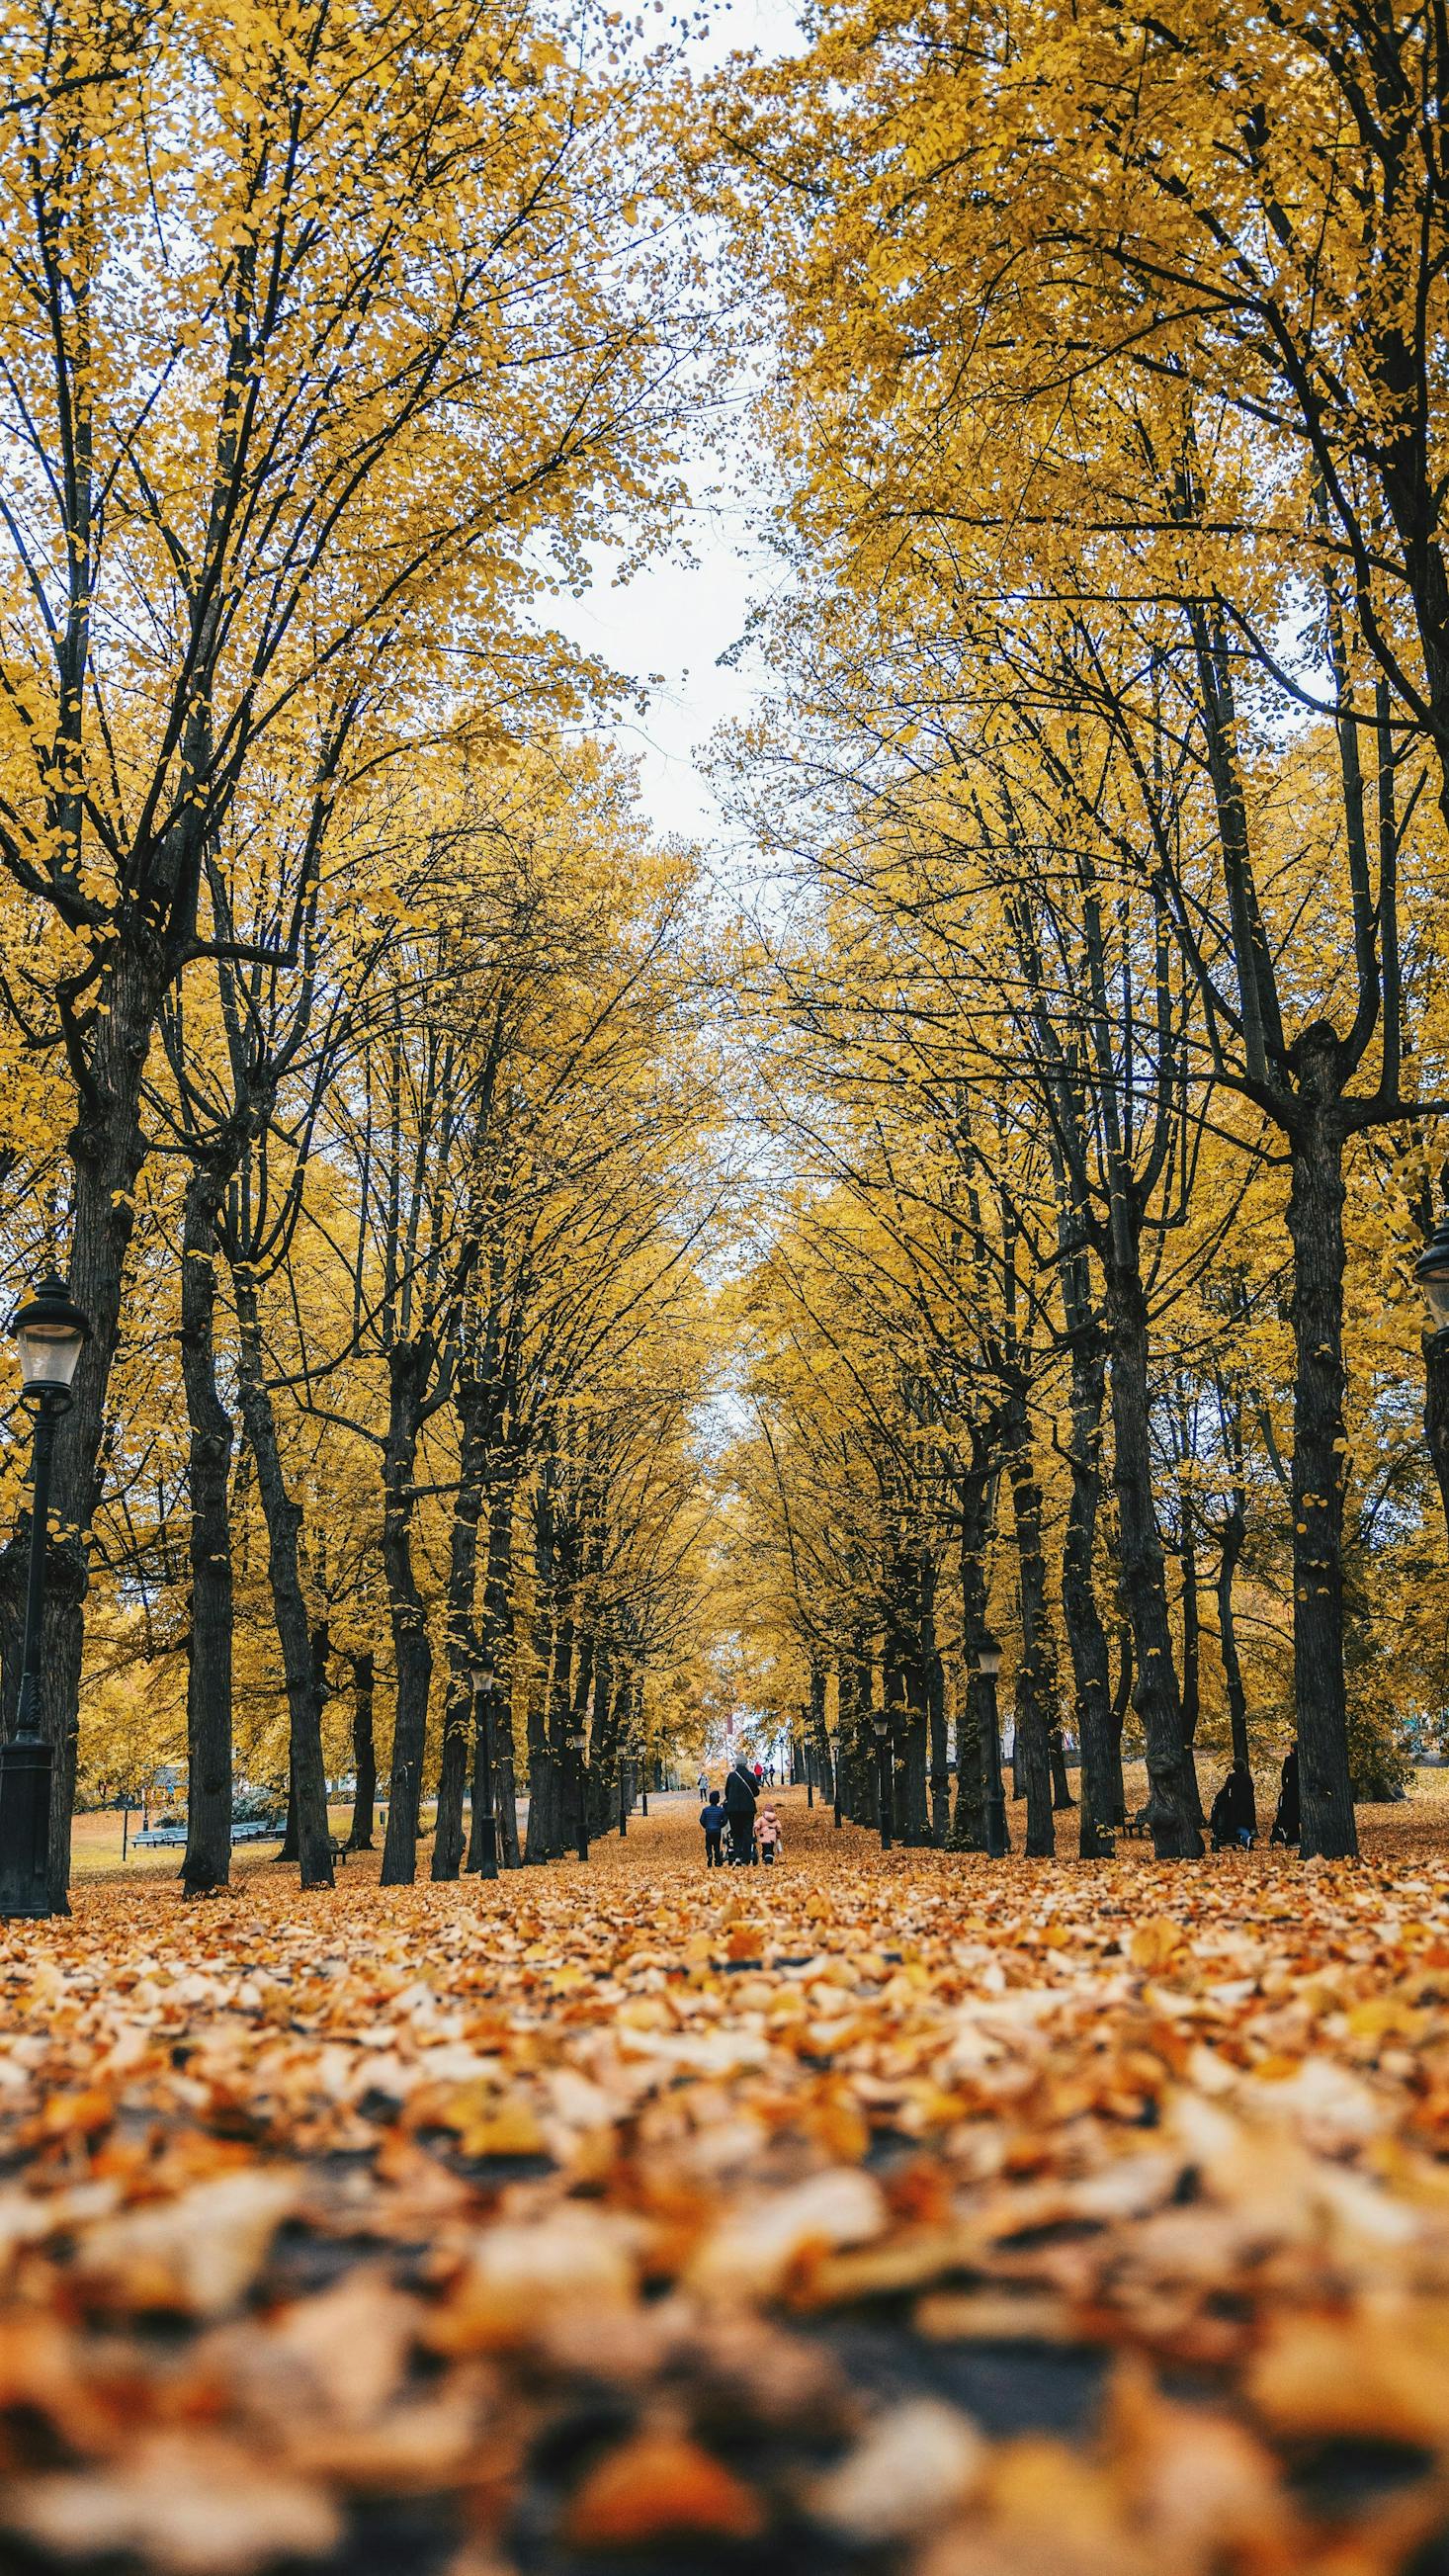 Looking down a path of trees in a park during fall, with a yellow canopy of leaves